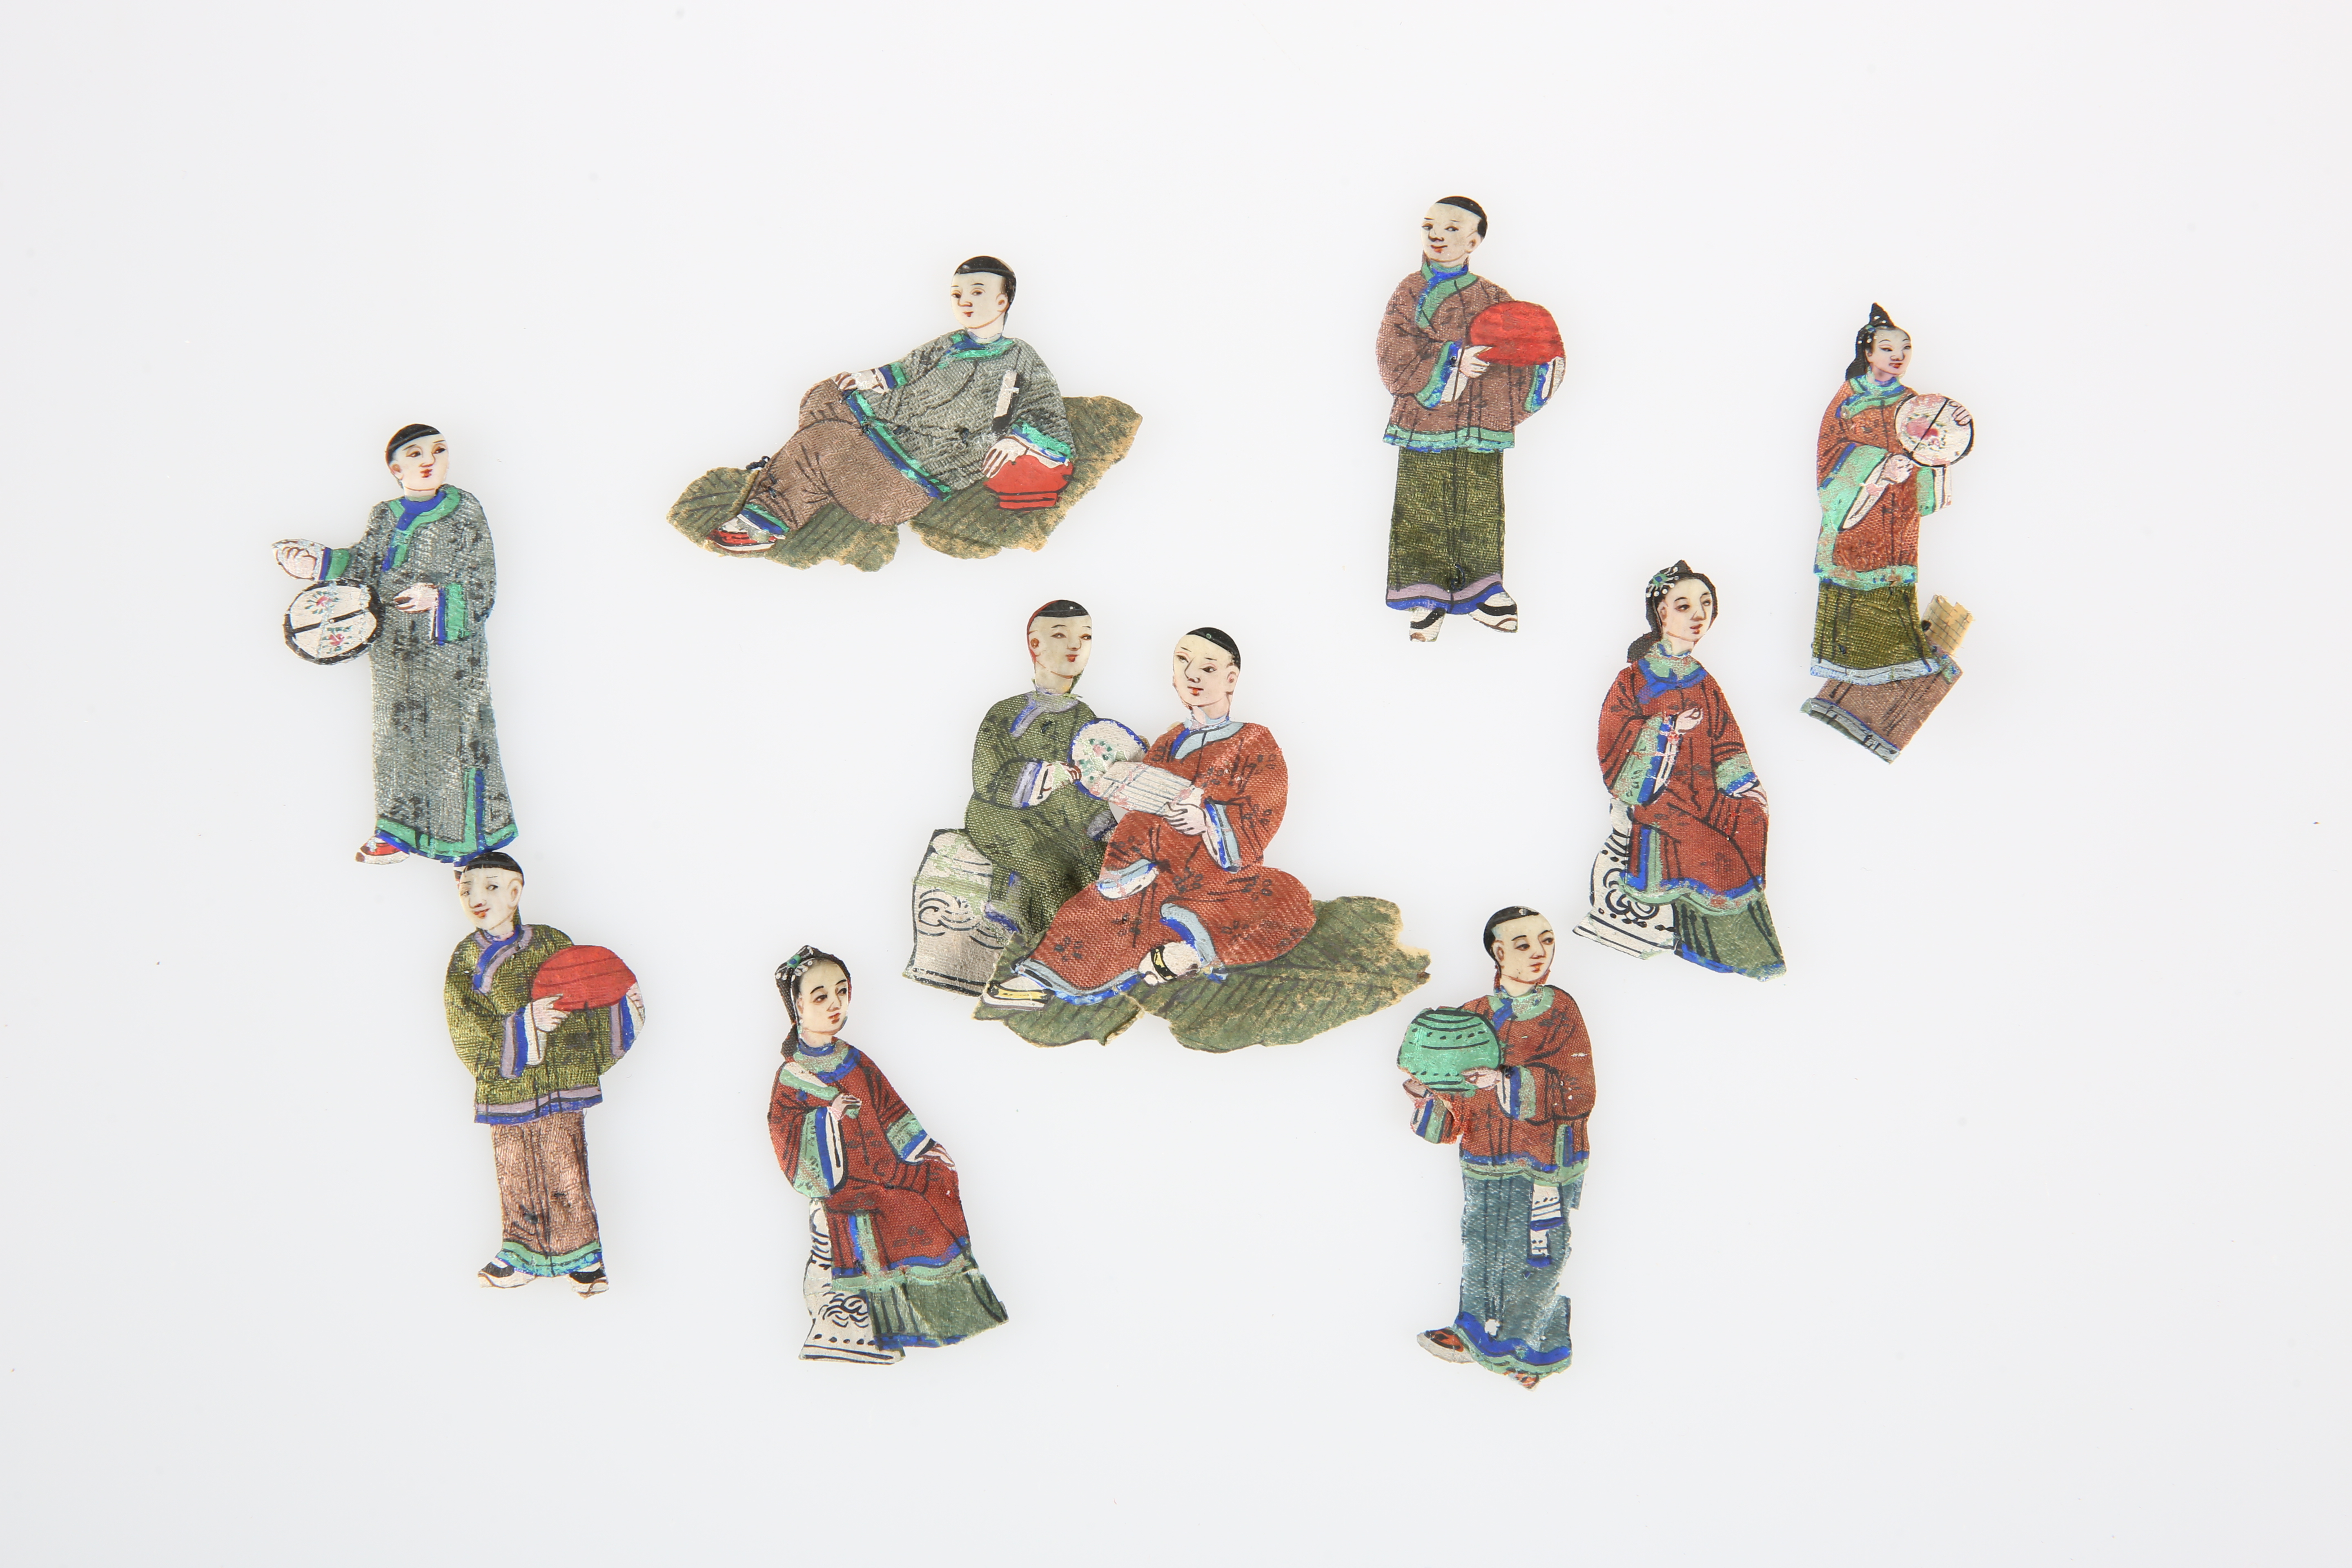 A COLLECTION OF CHINESE PAINTED SILK PAPER FIGURES, LATE 19TH/EARLY 20TH CENTURY - Image 2 of 2